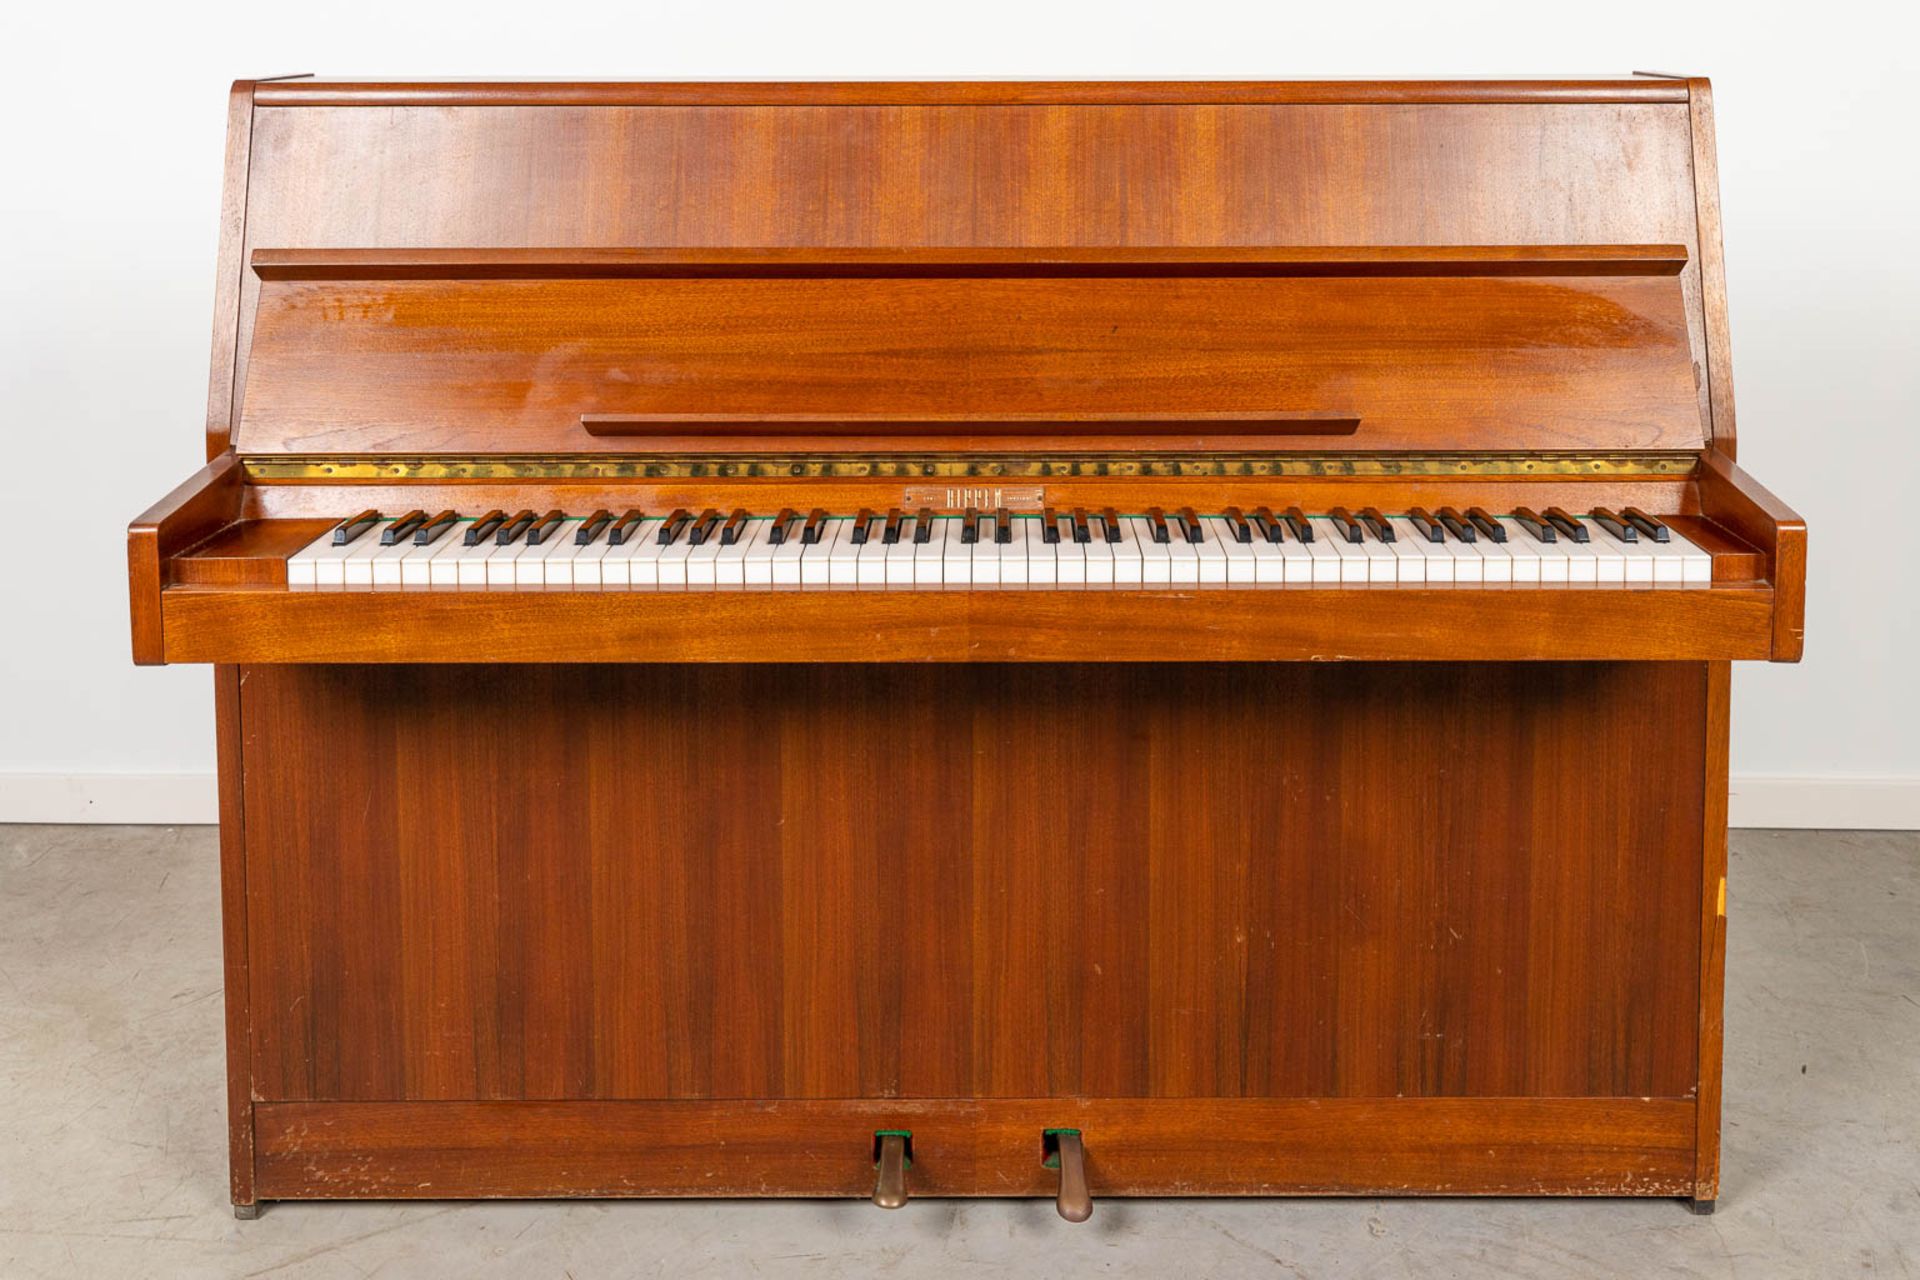 An upright piano with a steel frame and marked Rippen. - Image 4 of 7